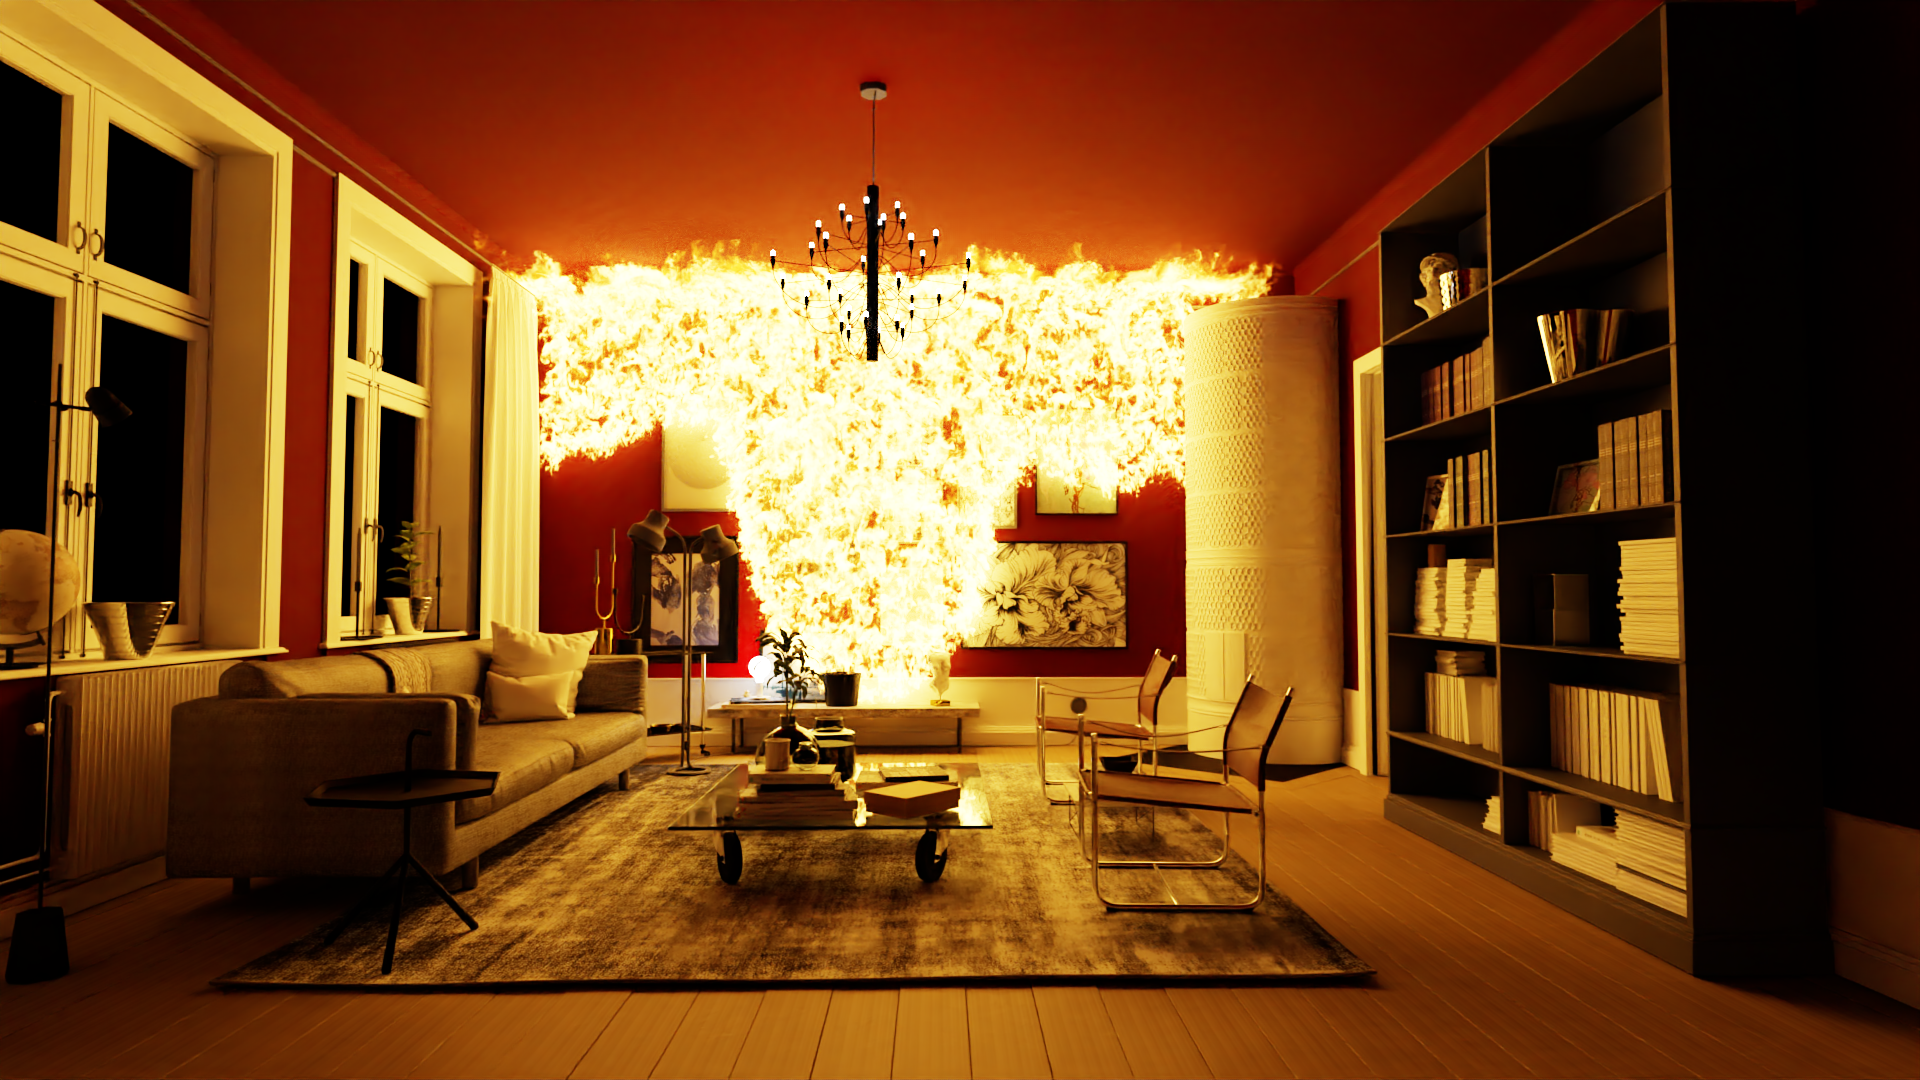 _images/create_splash-image_apartment-on-fire.png